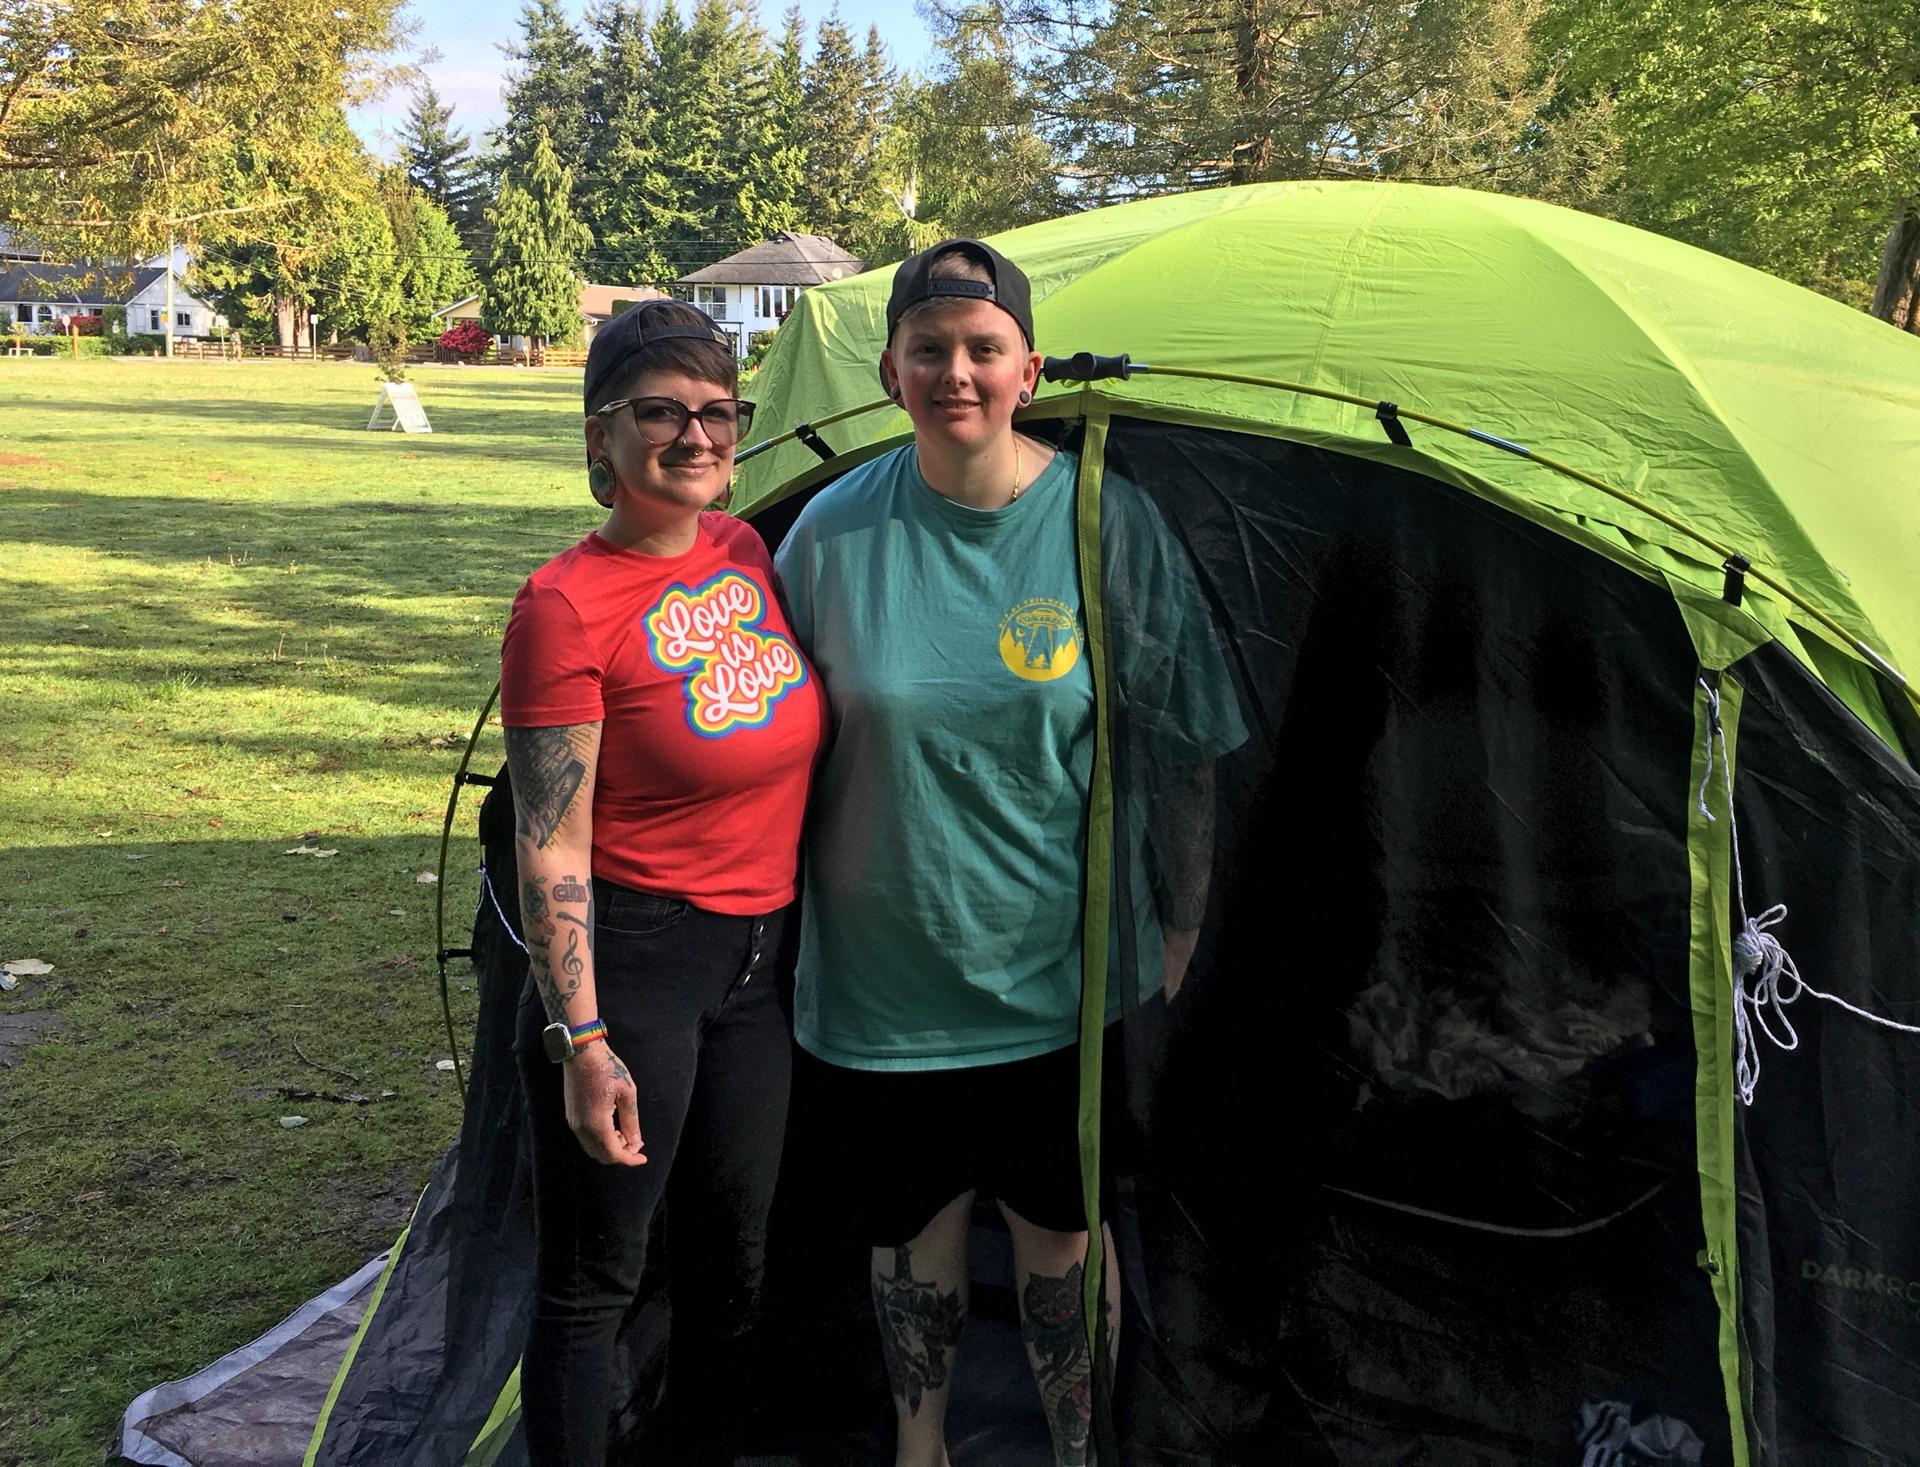 Alexis Gurr (left), of Everett, Washington, and her wife, Katrina Gurr, of Port Moody, British Columbia, pose outside their tent on the US side of Peace Arch Park.